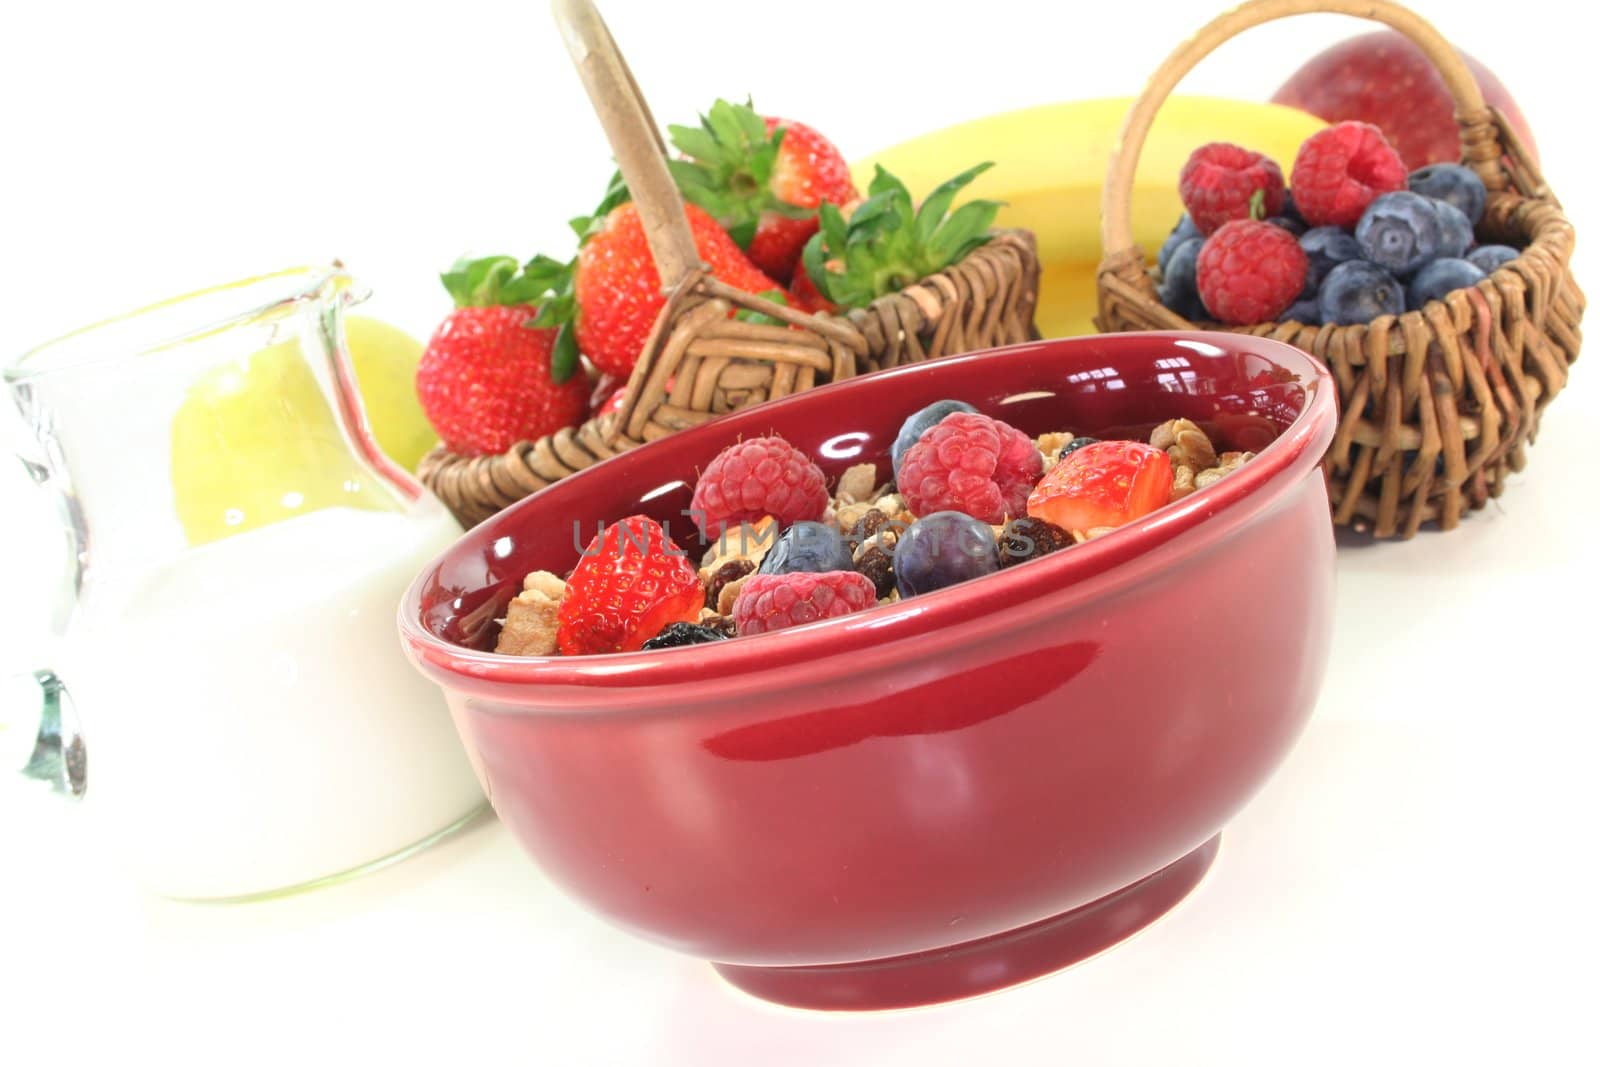 Cereal bowl of fresh fruit, nuts and milk before a white background